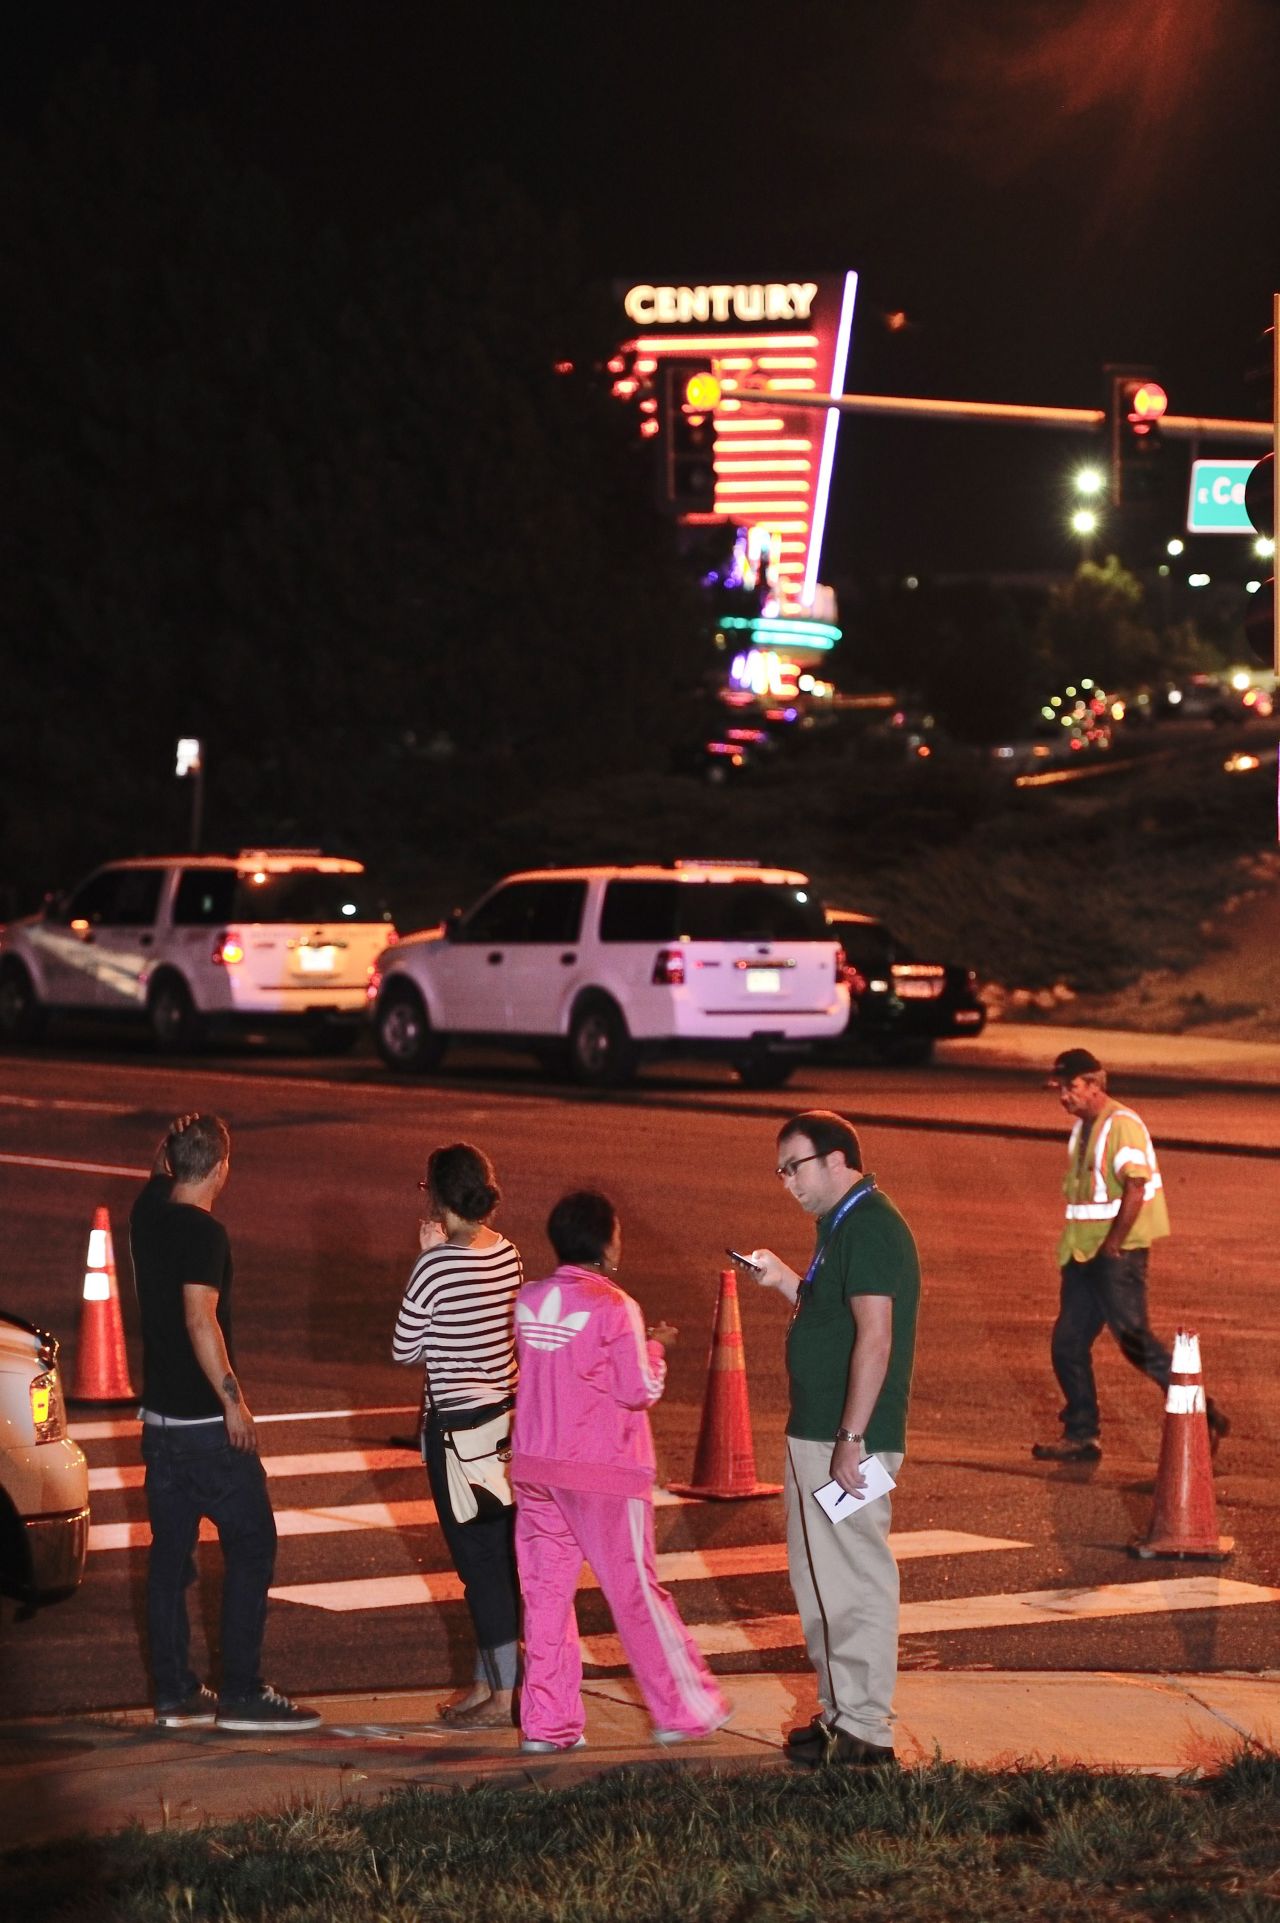 Onlookers gather outside the Century Aurora 16 theater.